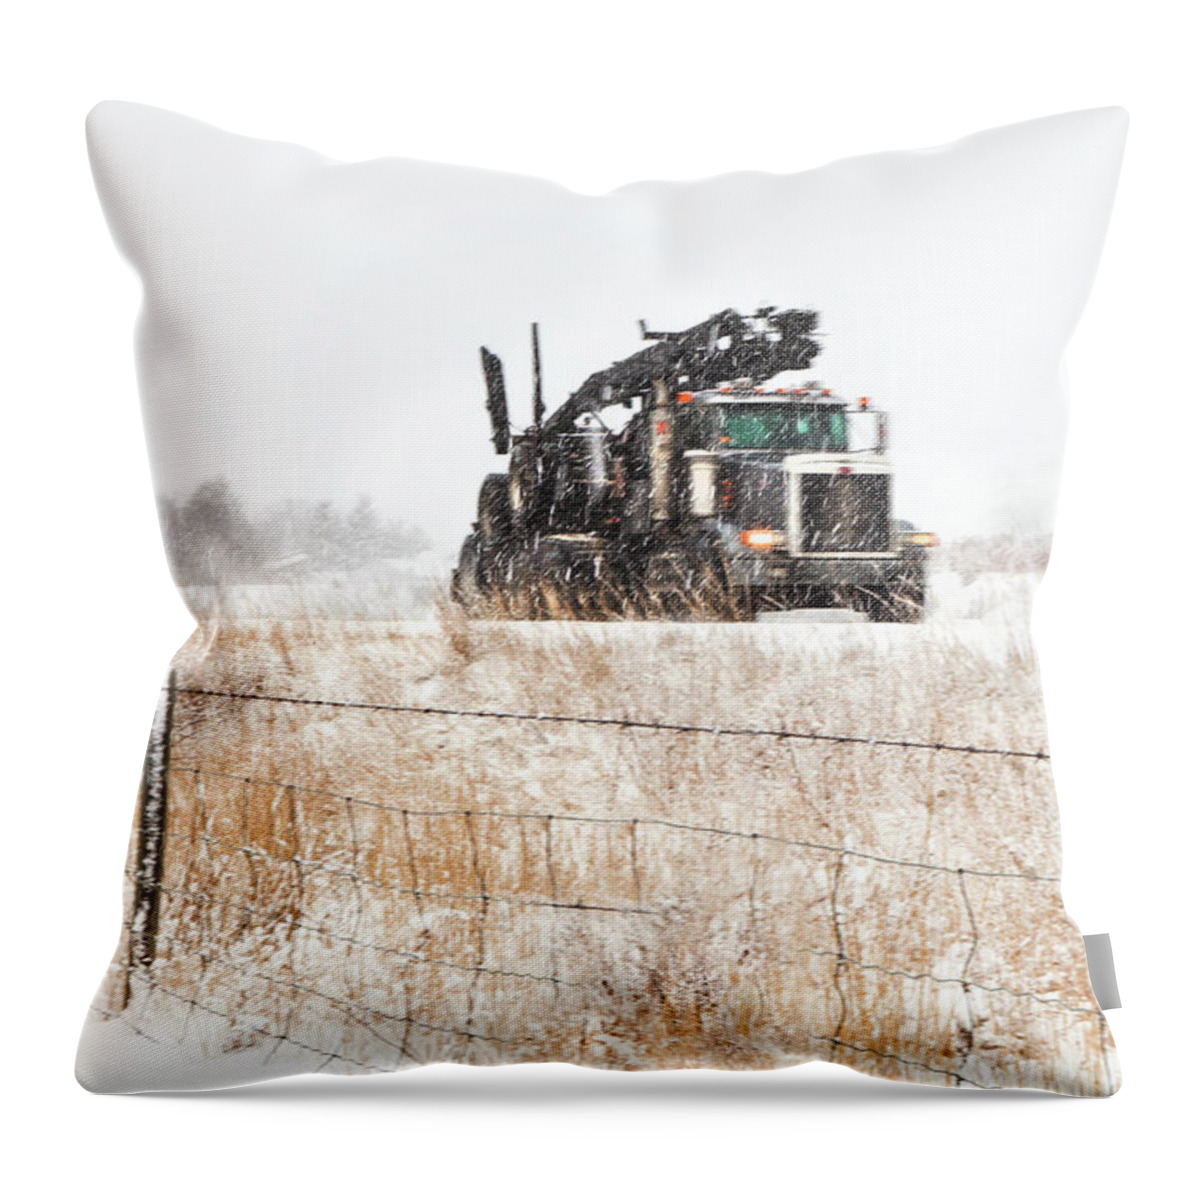  Trucks Throw Pillow featuring the photograph Logging Truck by Theresa Tahara